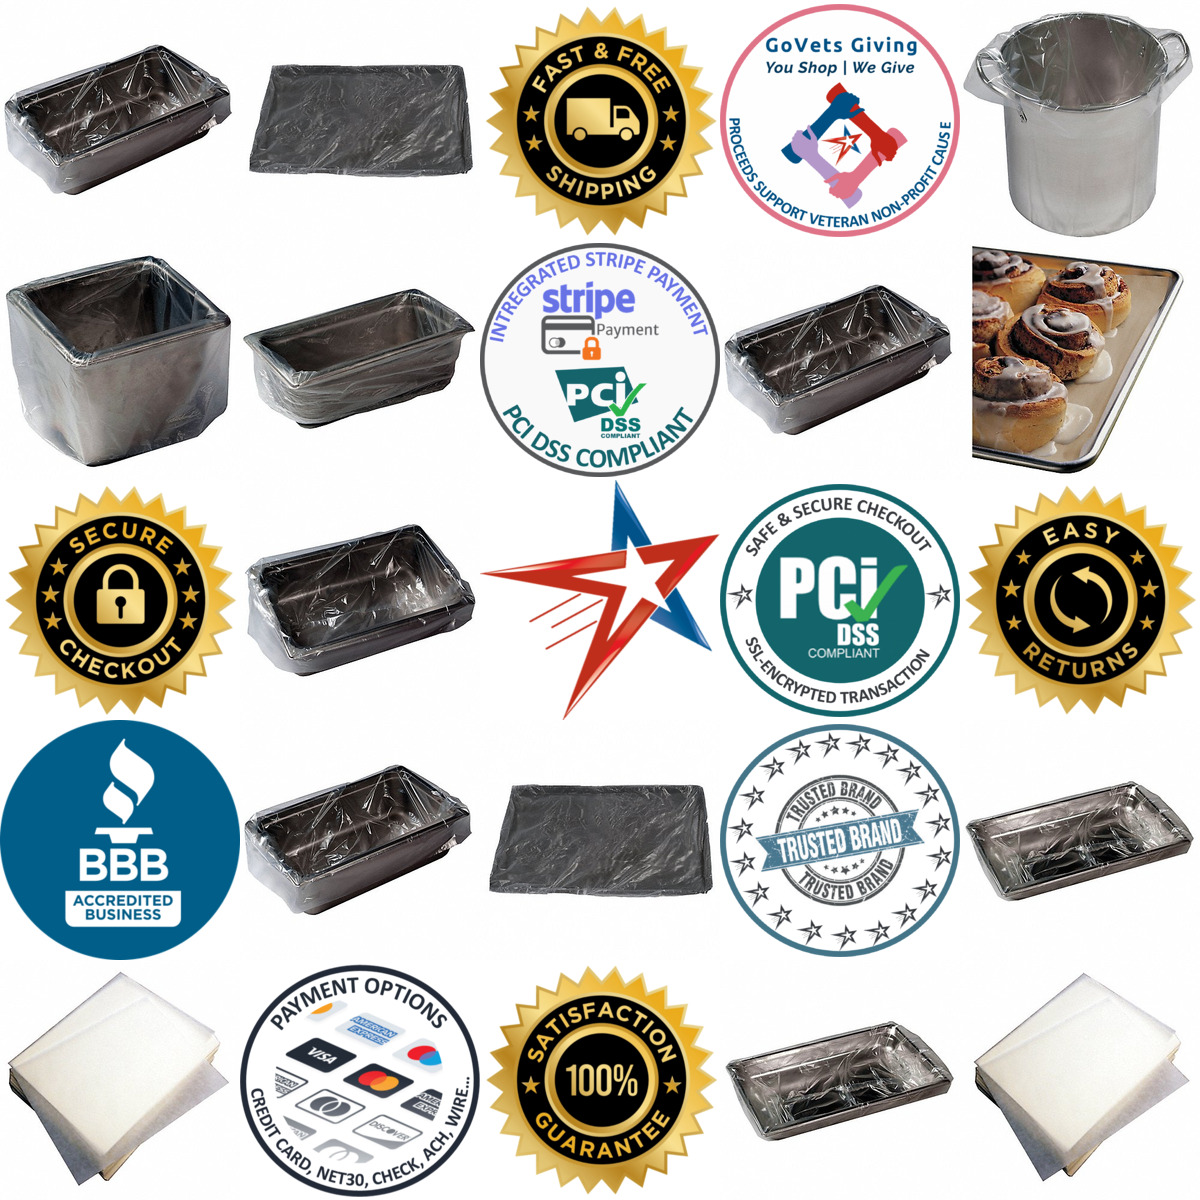 A selection of Disposable Pan Liners products on GoVets